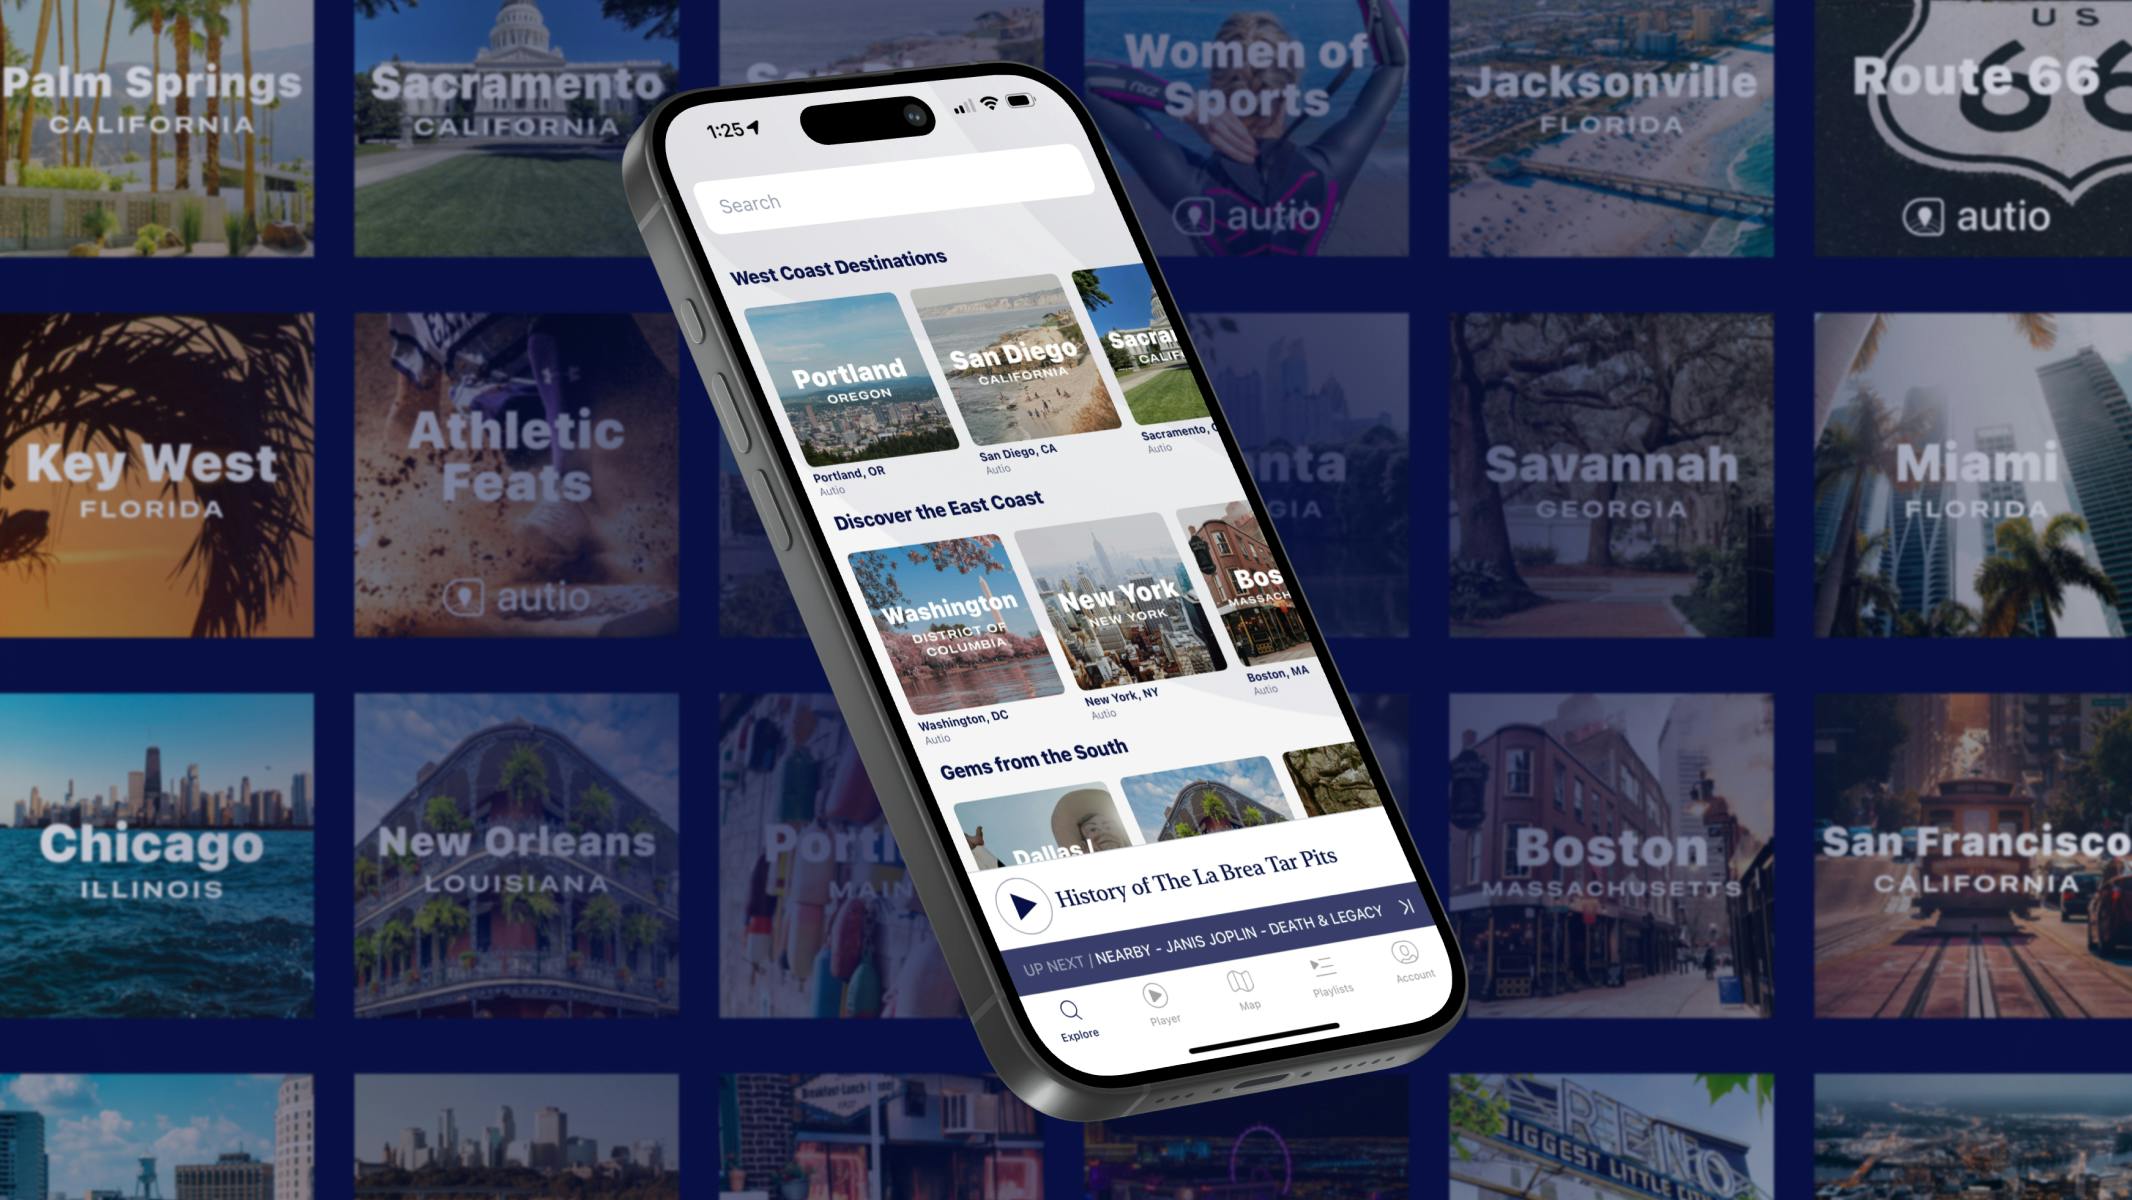 Location-Based Travel App, Autio, Announces the Launch of Playlists For Exploration, Discovery, And Adventure From Anywhere